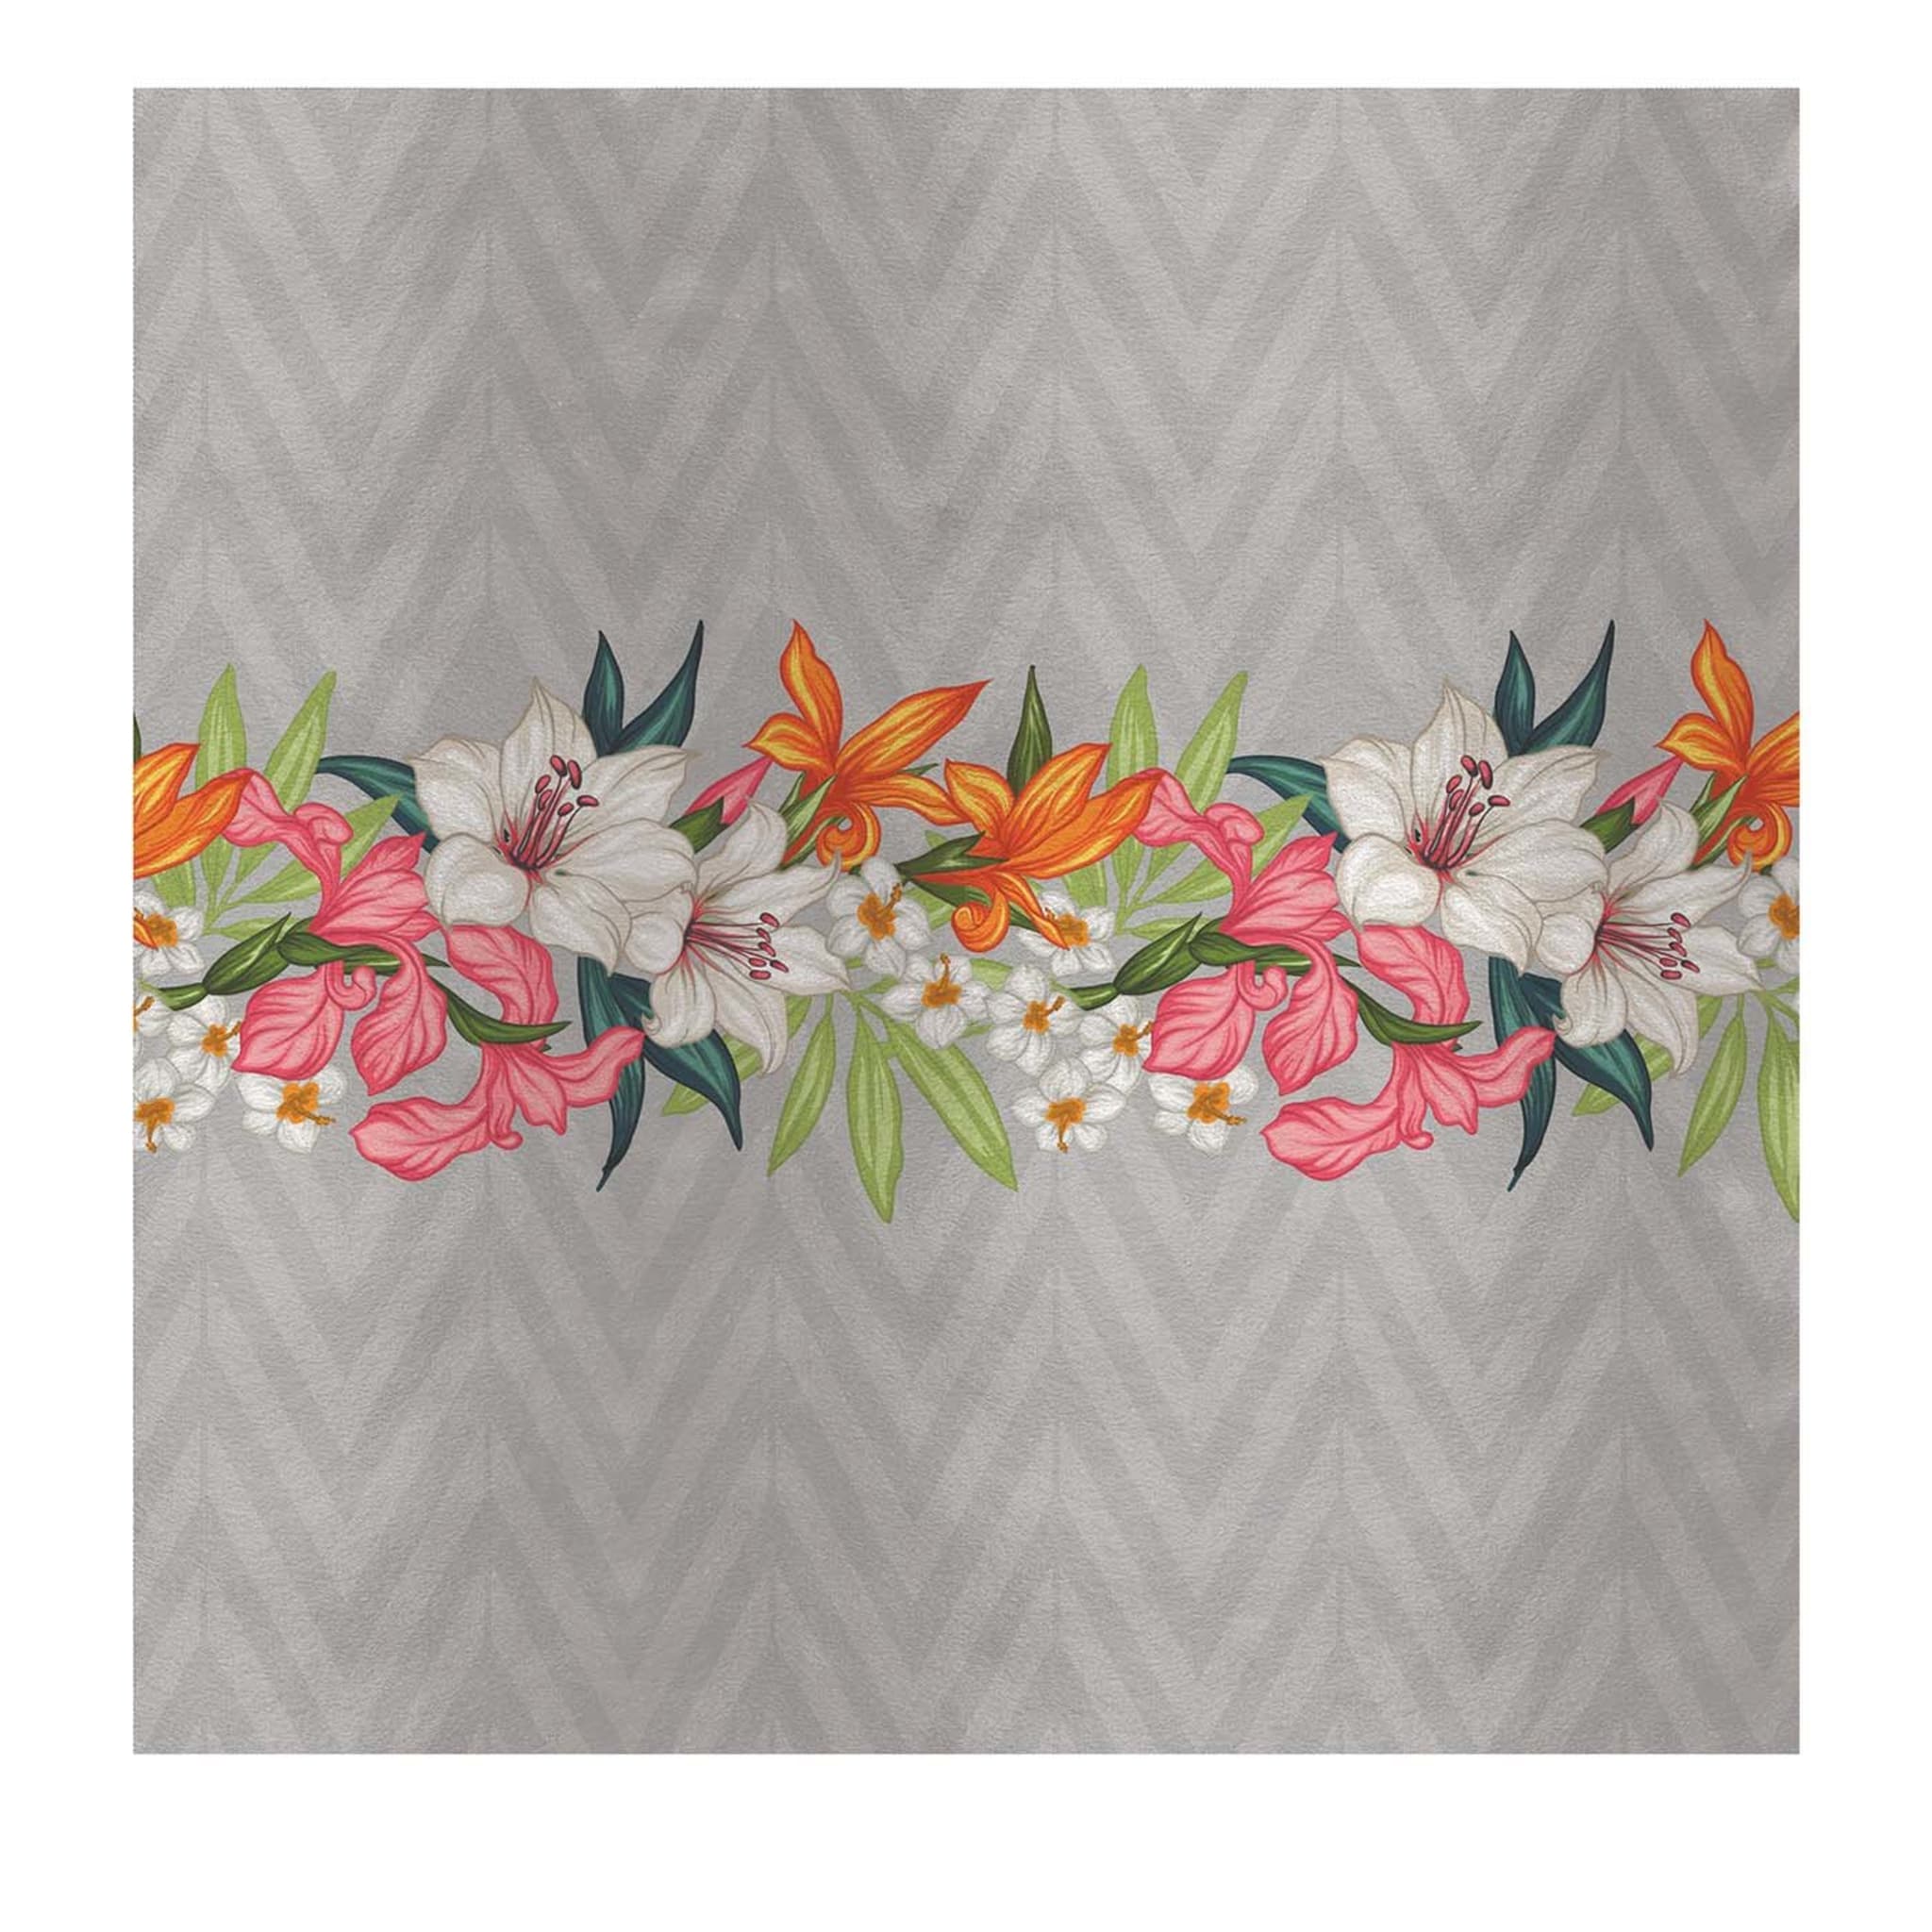 Flowers and Chevron Pattern Grey Panel #1 - Main view